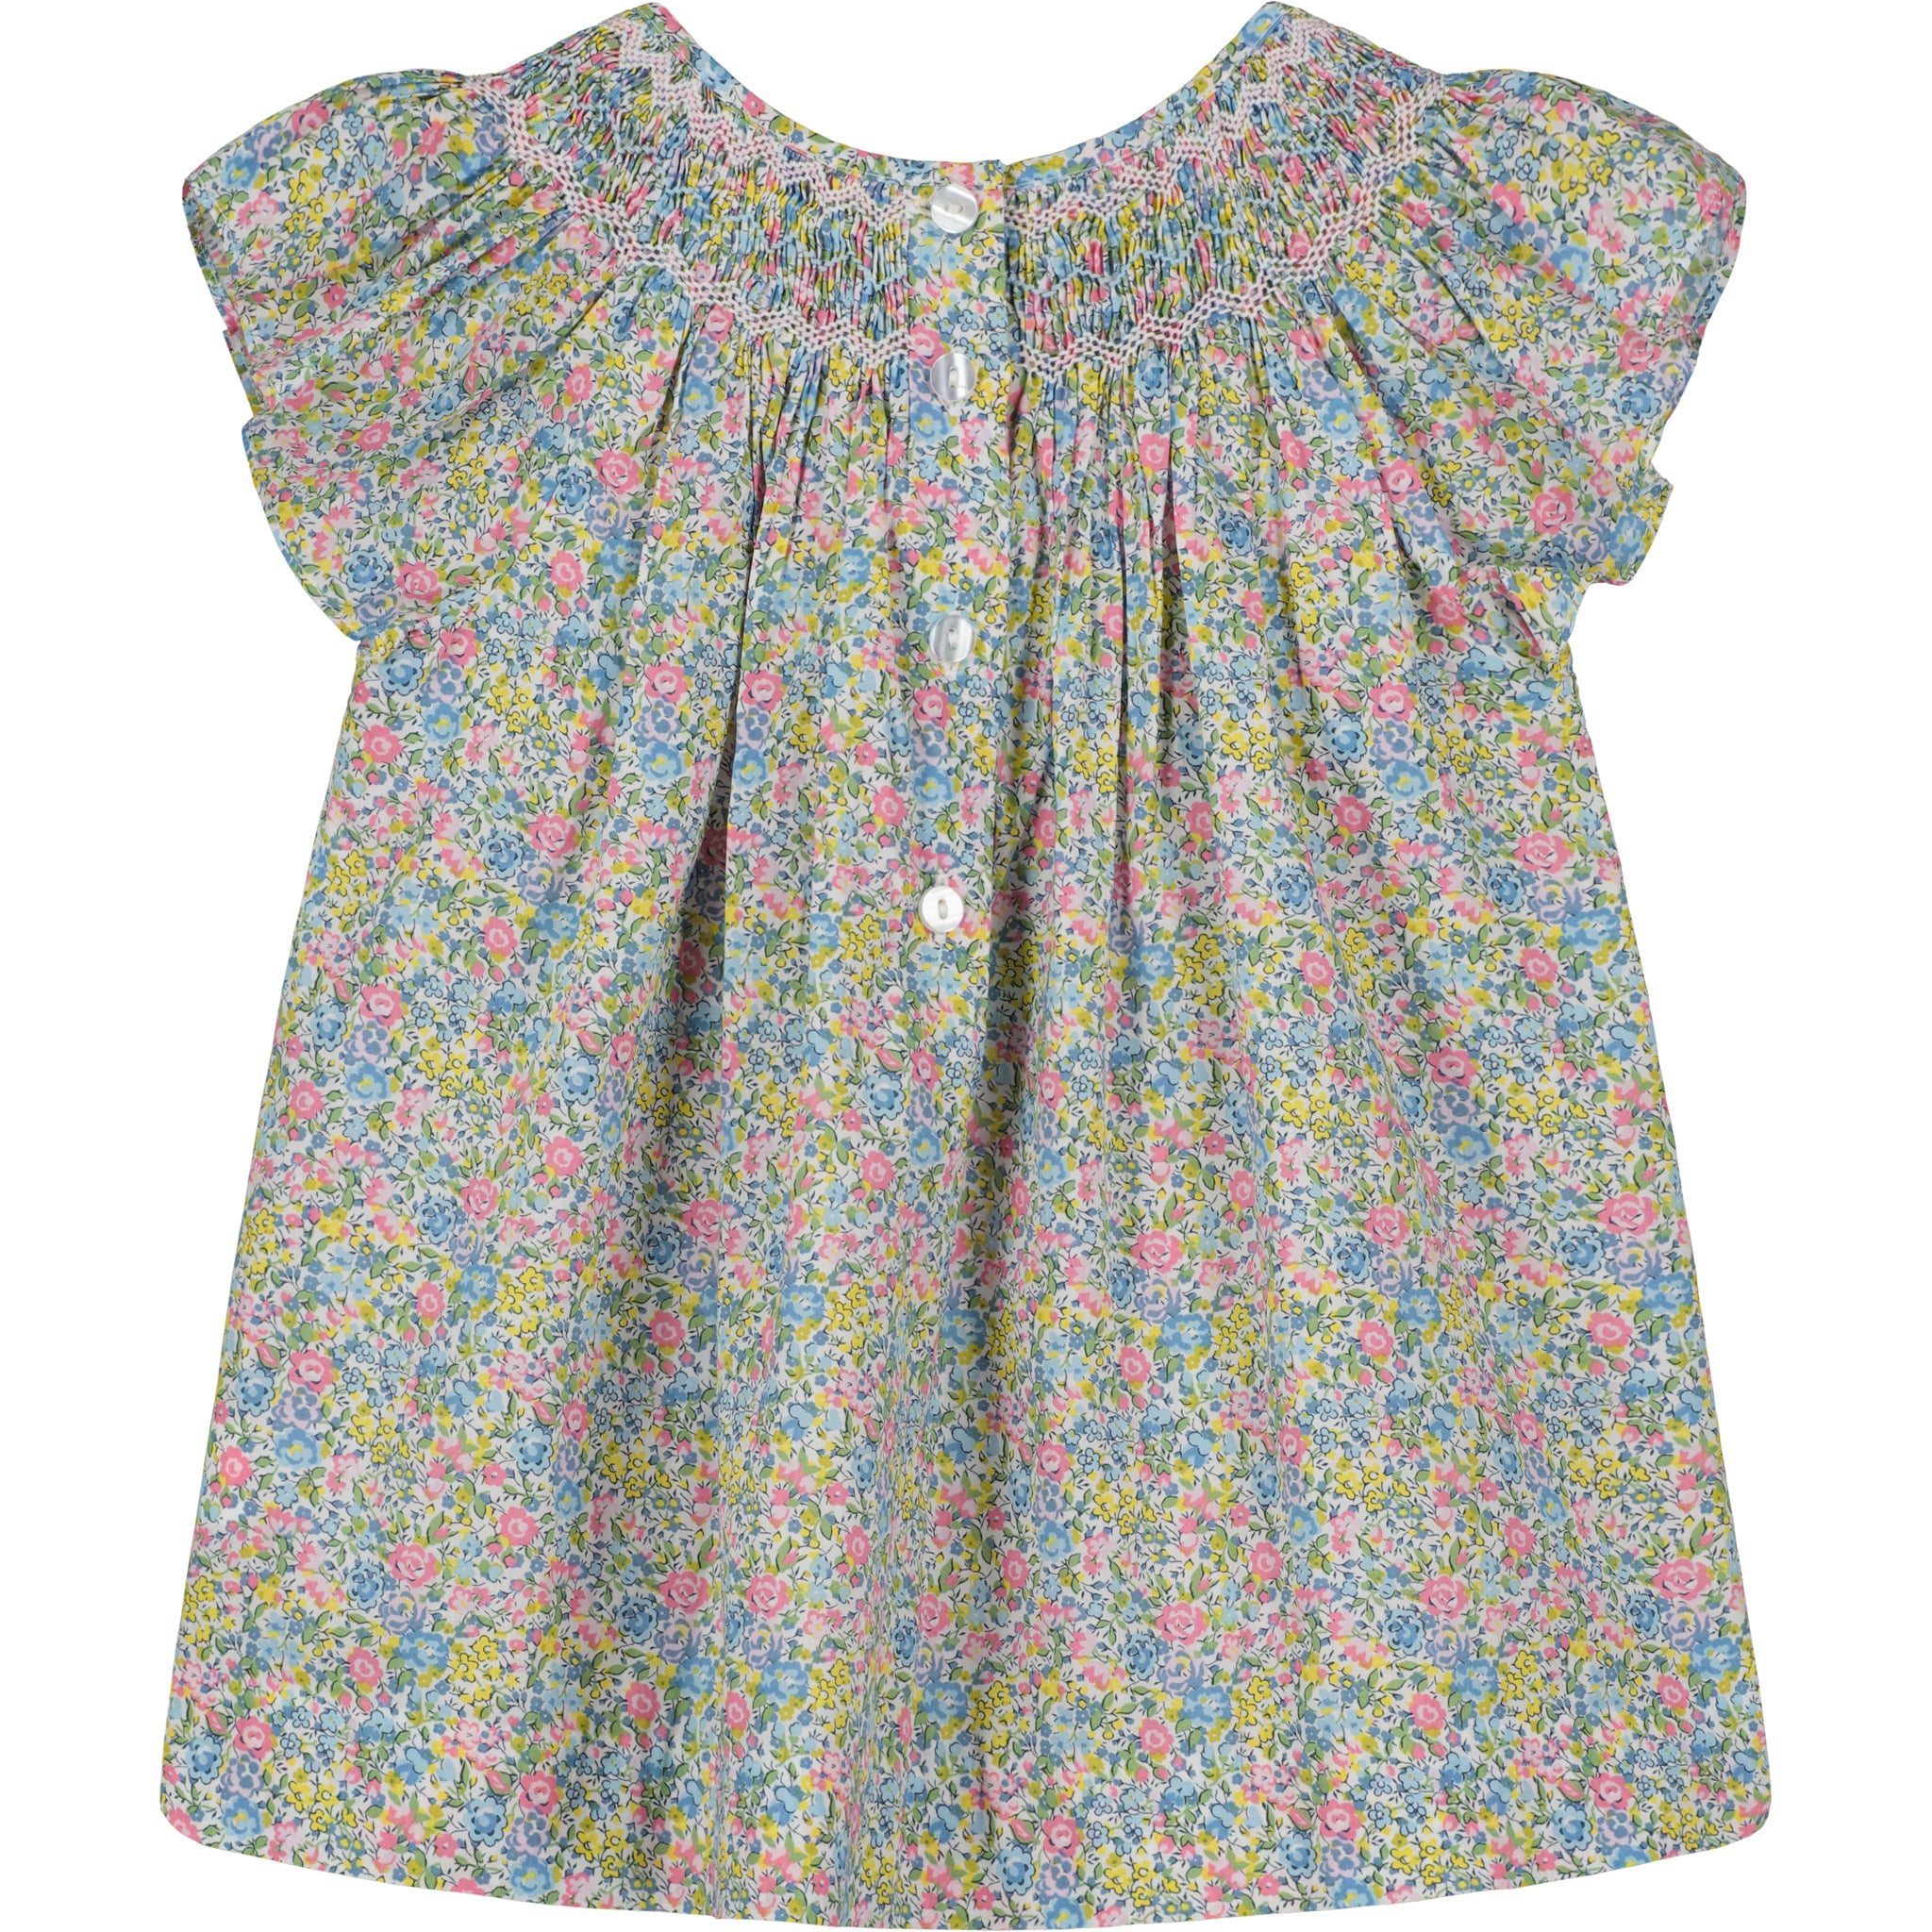 floral girls blouse made from Liberty fabric with smocking, back